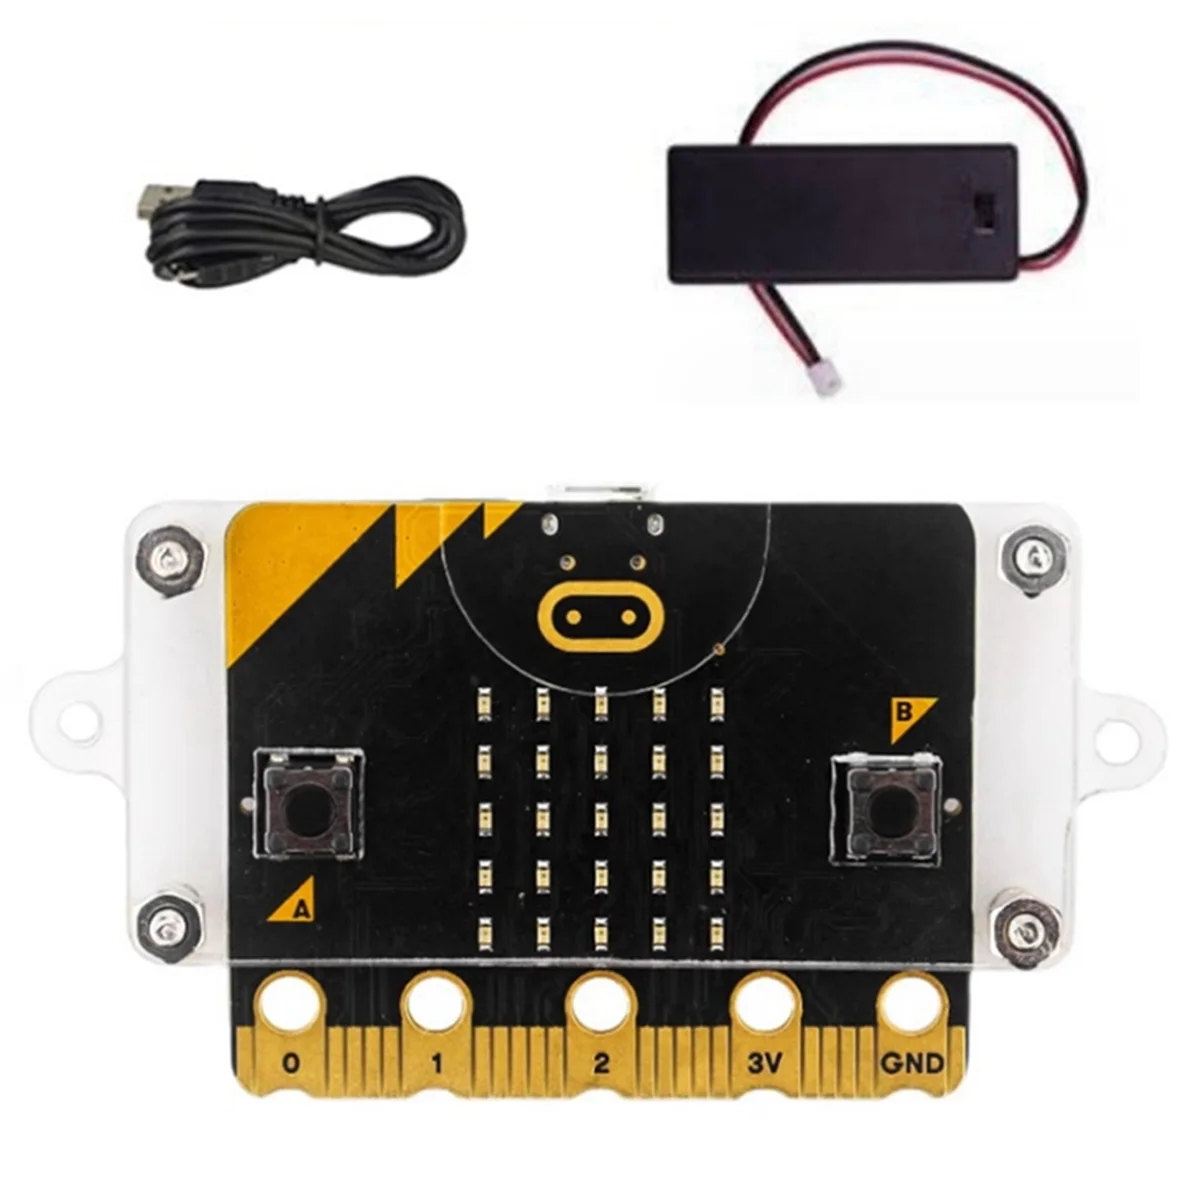 

Bbc Microbit V2.0 Motherboard An Introduction to Graphical Programming in Python Programmable Learning DevelopmentBoard A